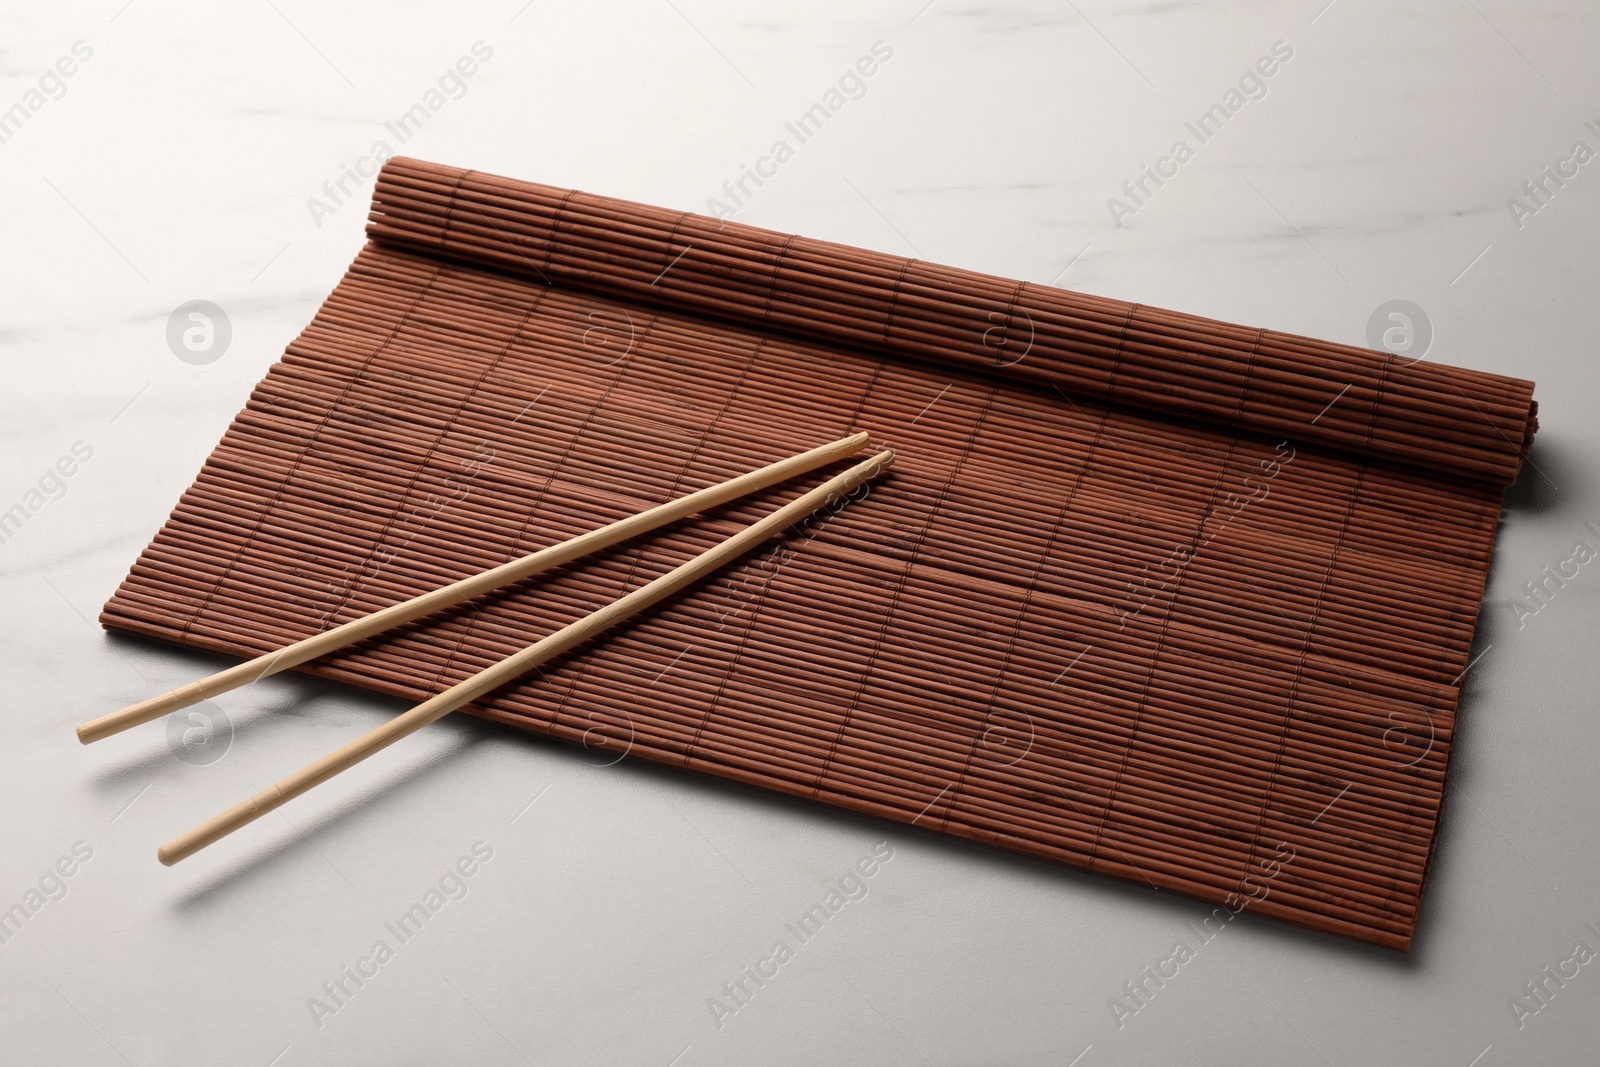 Photo of Rolled bamboo mat and chopsticks on white marble table